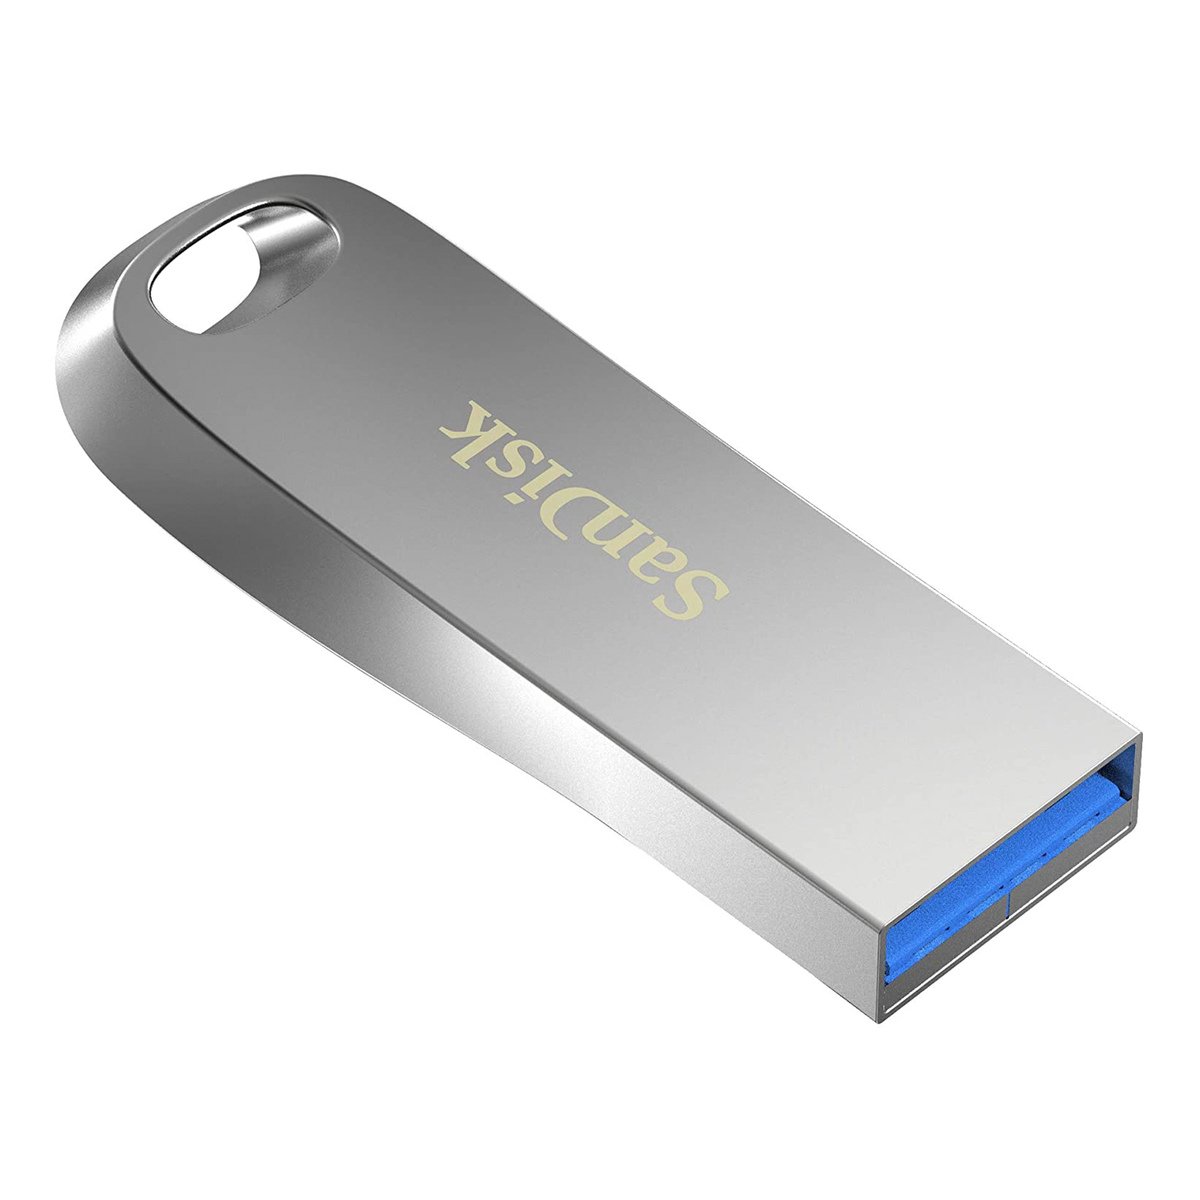 Sandisk USB3.1 Luxe SDCZ74 64GB Flash drive